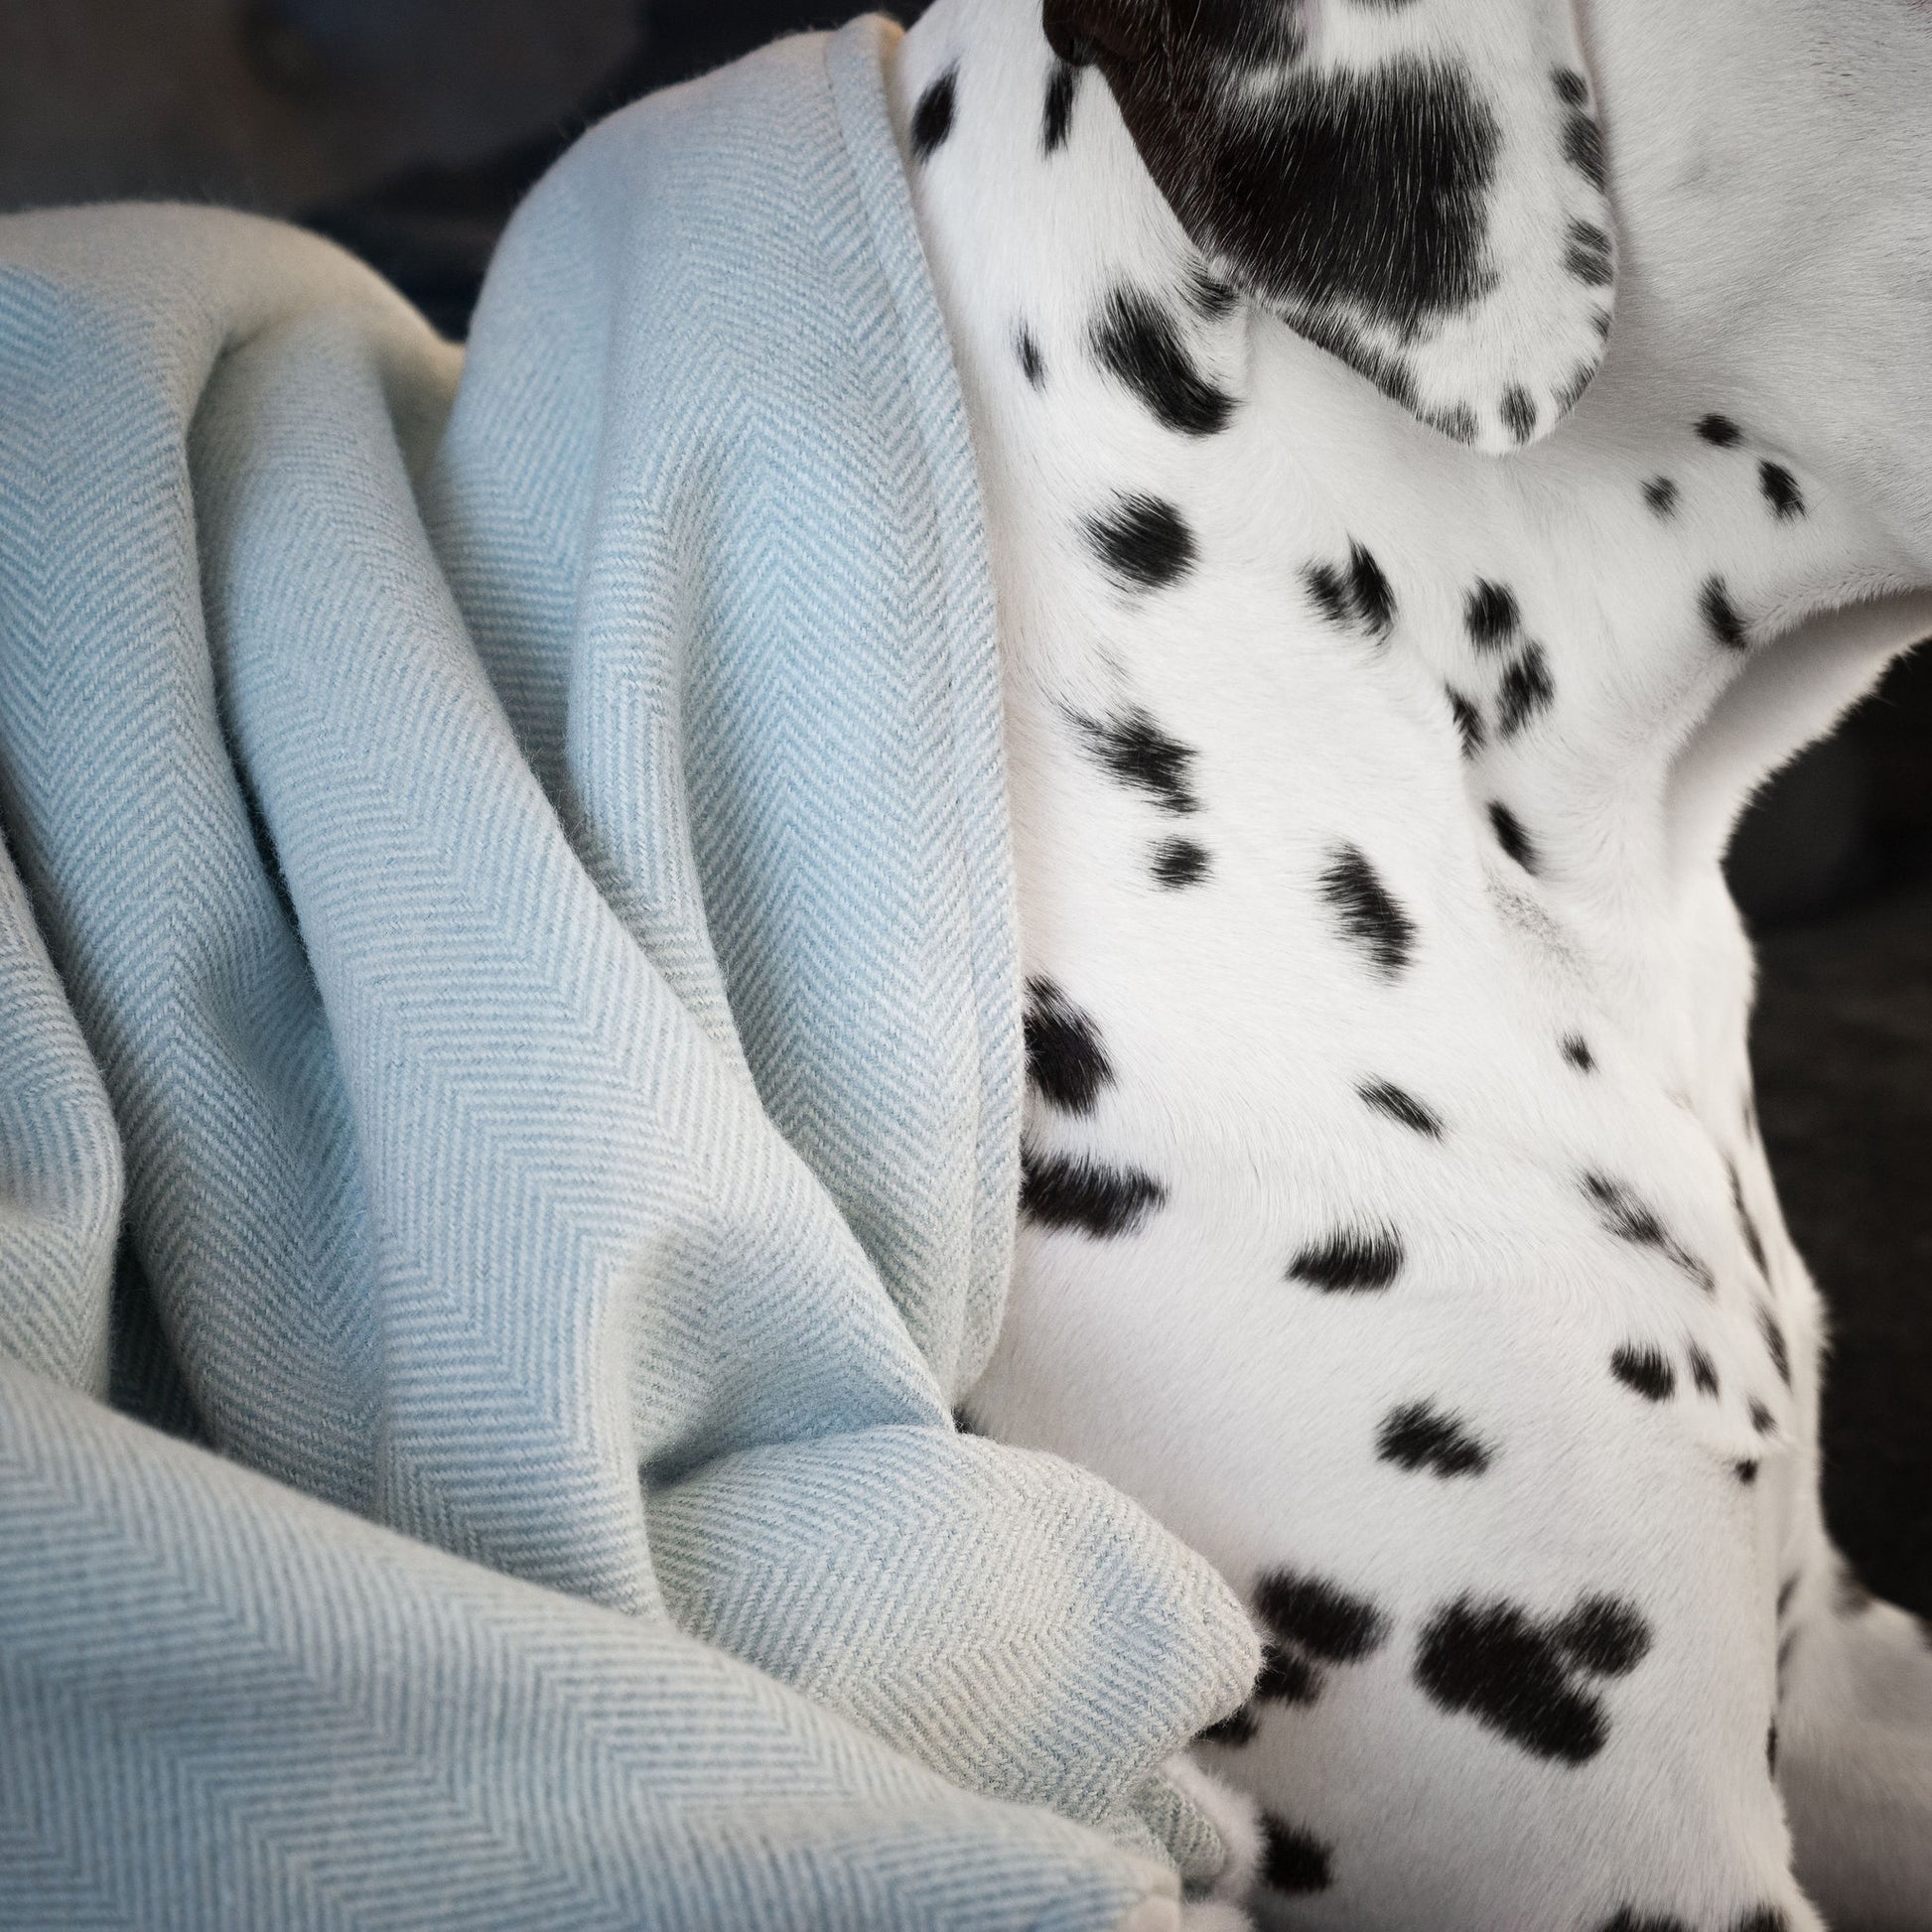 Discover Our Luxurious Duck Egg Herringbone Tweed Dog Blanket With Super Soft Sherpa & Teddy Fleece, The Perfect Blanket For Puppies, Available To Personalize And In 2 Sizes Here at Lords & Labradors US